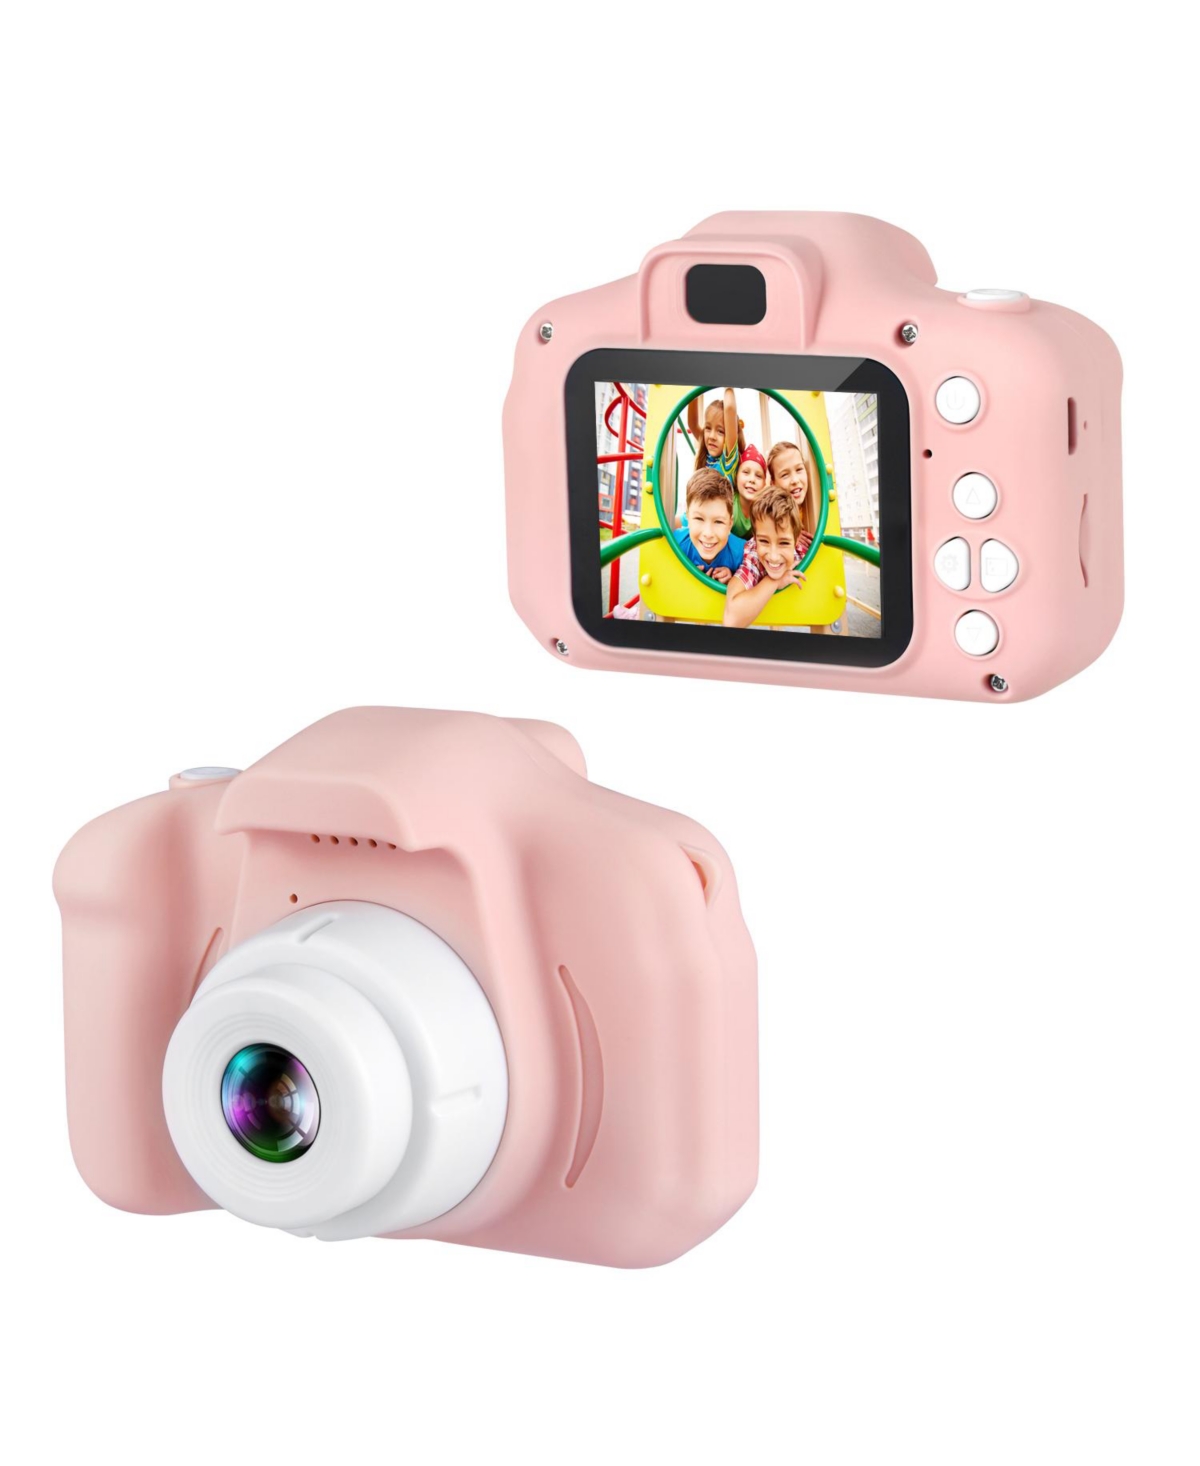 Dartwood 1080p Digital Camera For Kids With 2" Color Display Screen And Micro-sd Card Slot In Pink